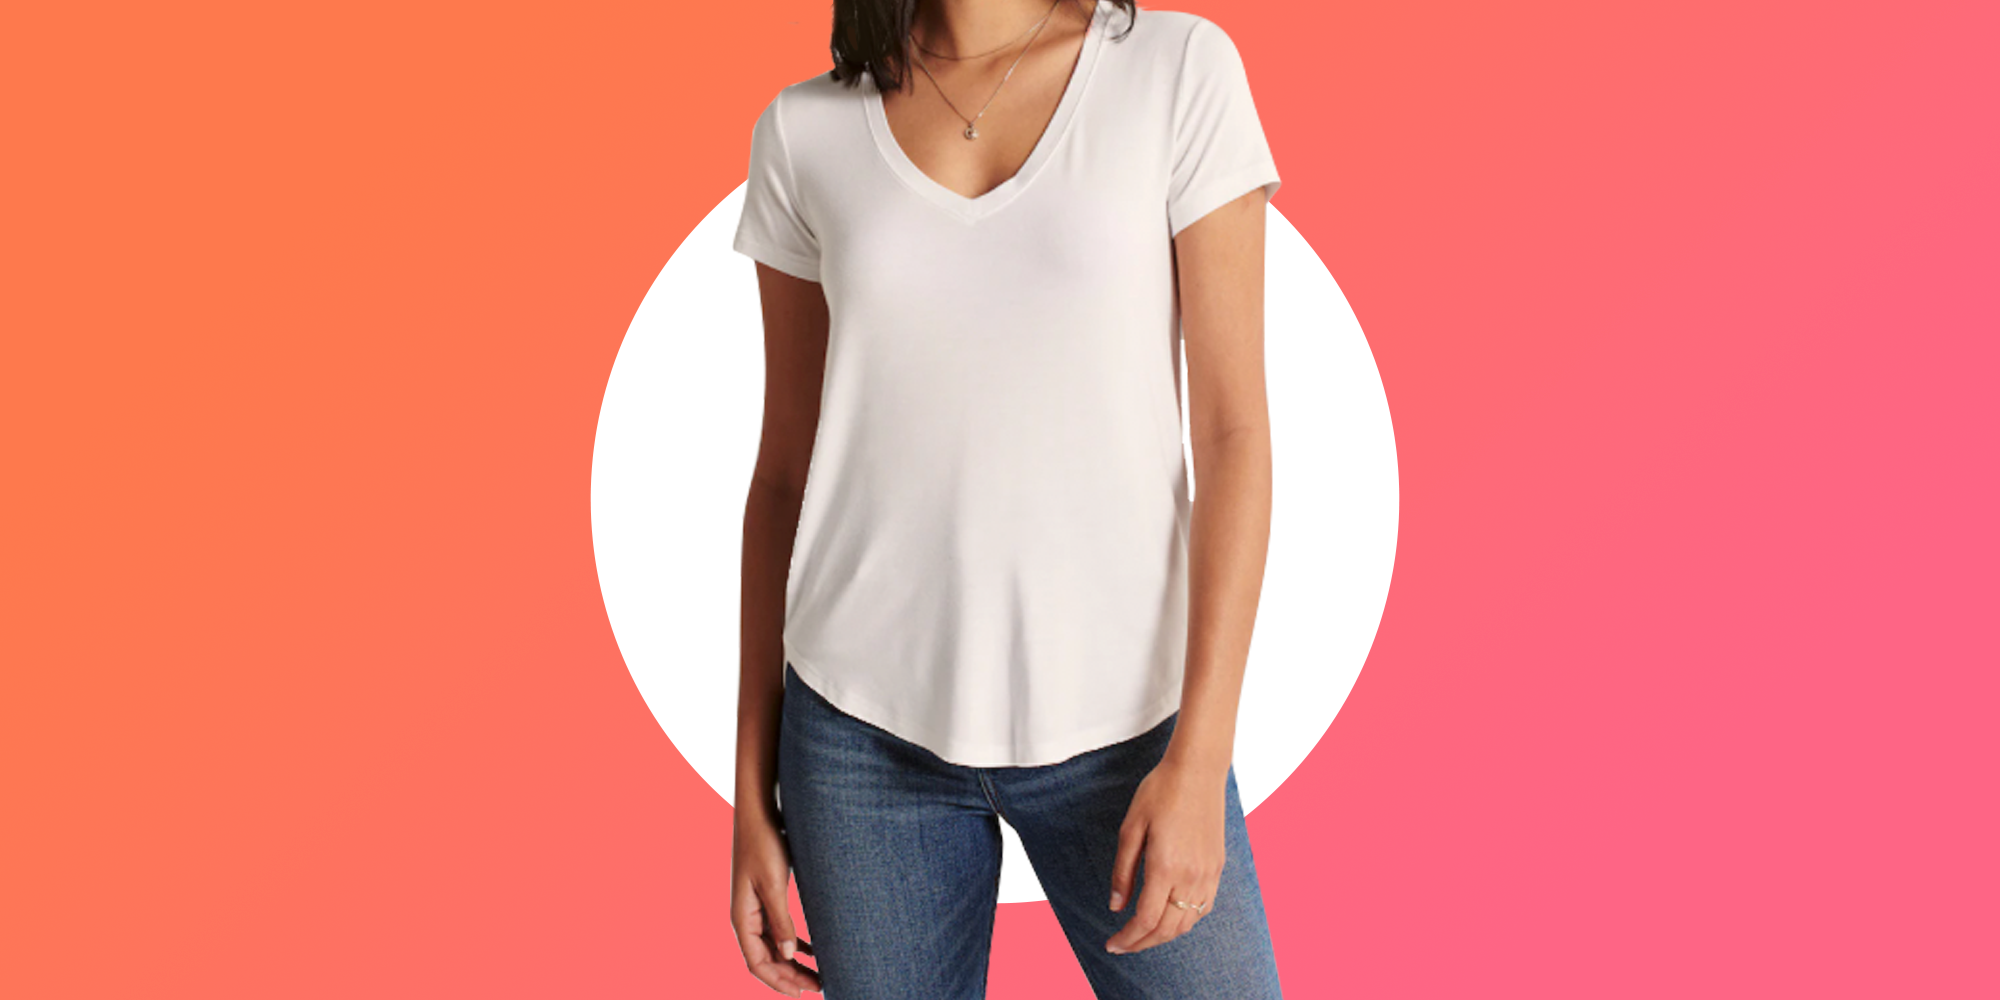 18 Best White T-Shirts - Cute White Tees for